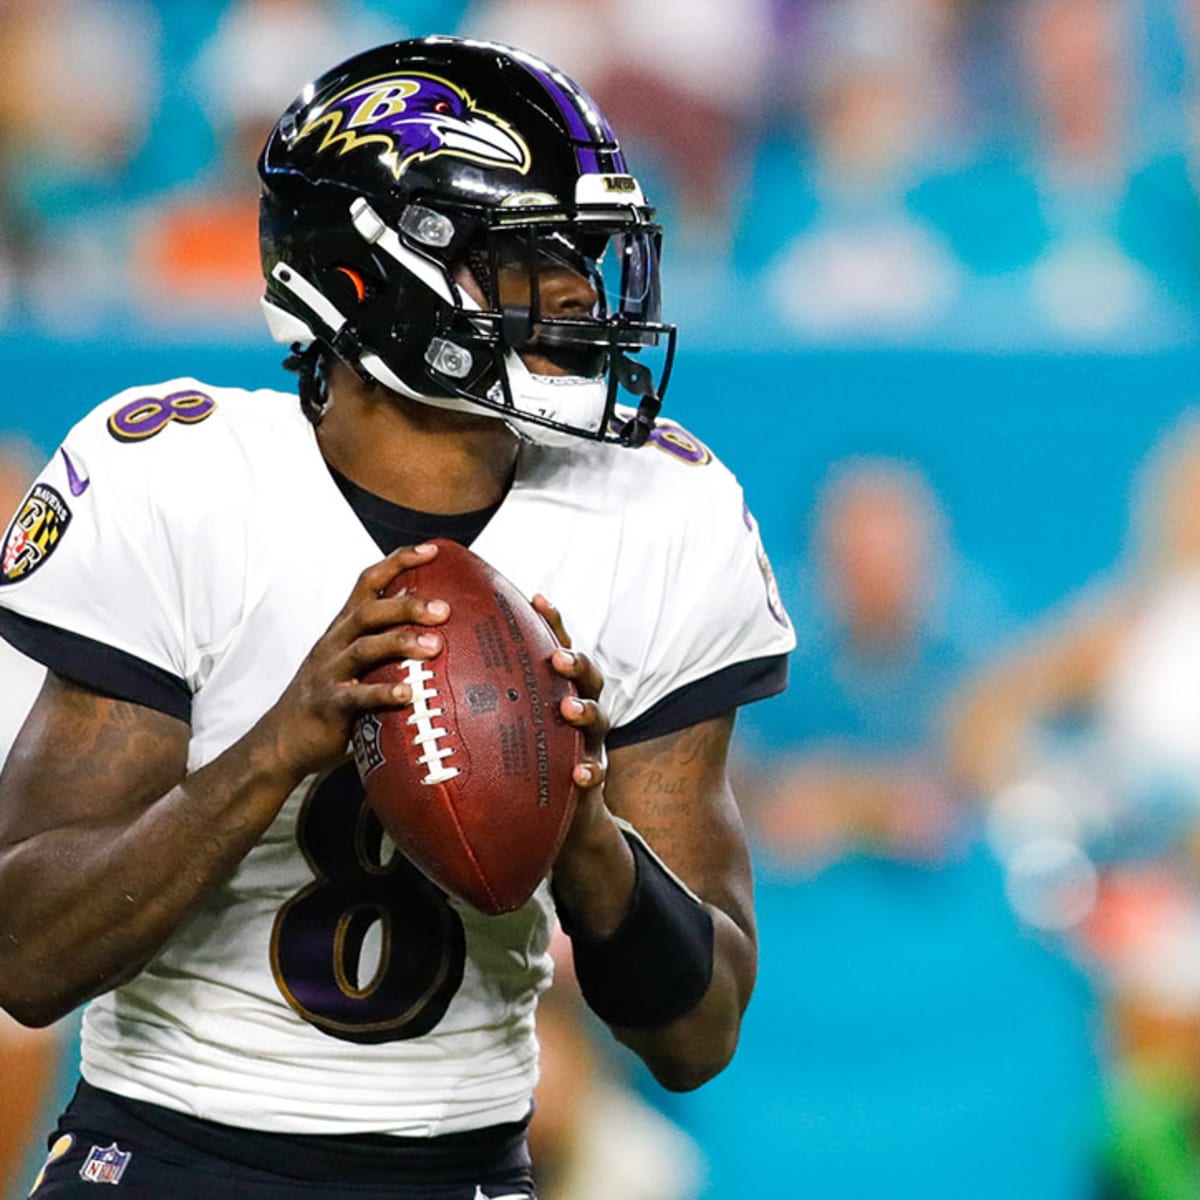 Ravens QB Lamar Jackson delights Browns fans with trade request